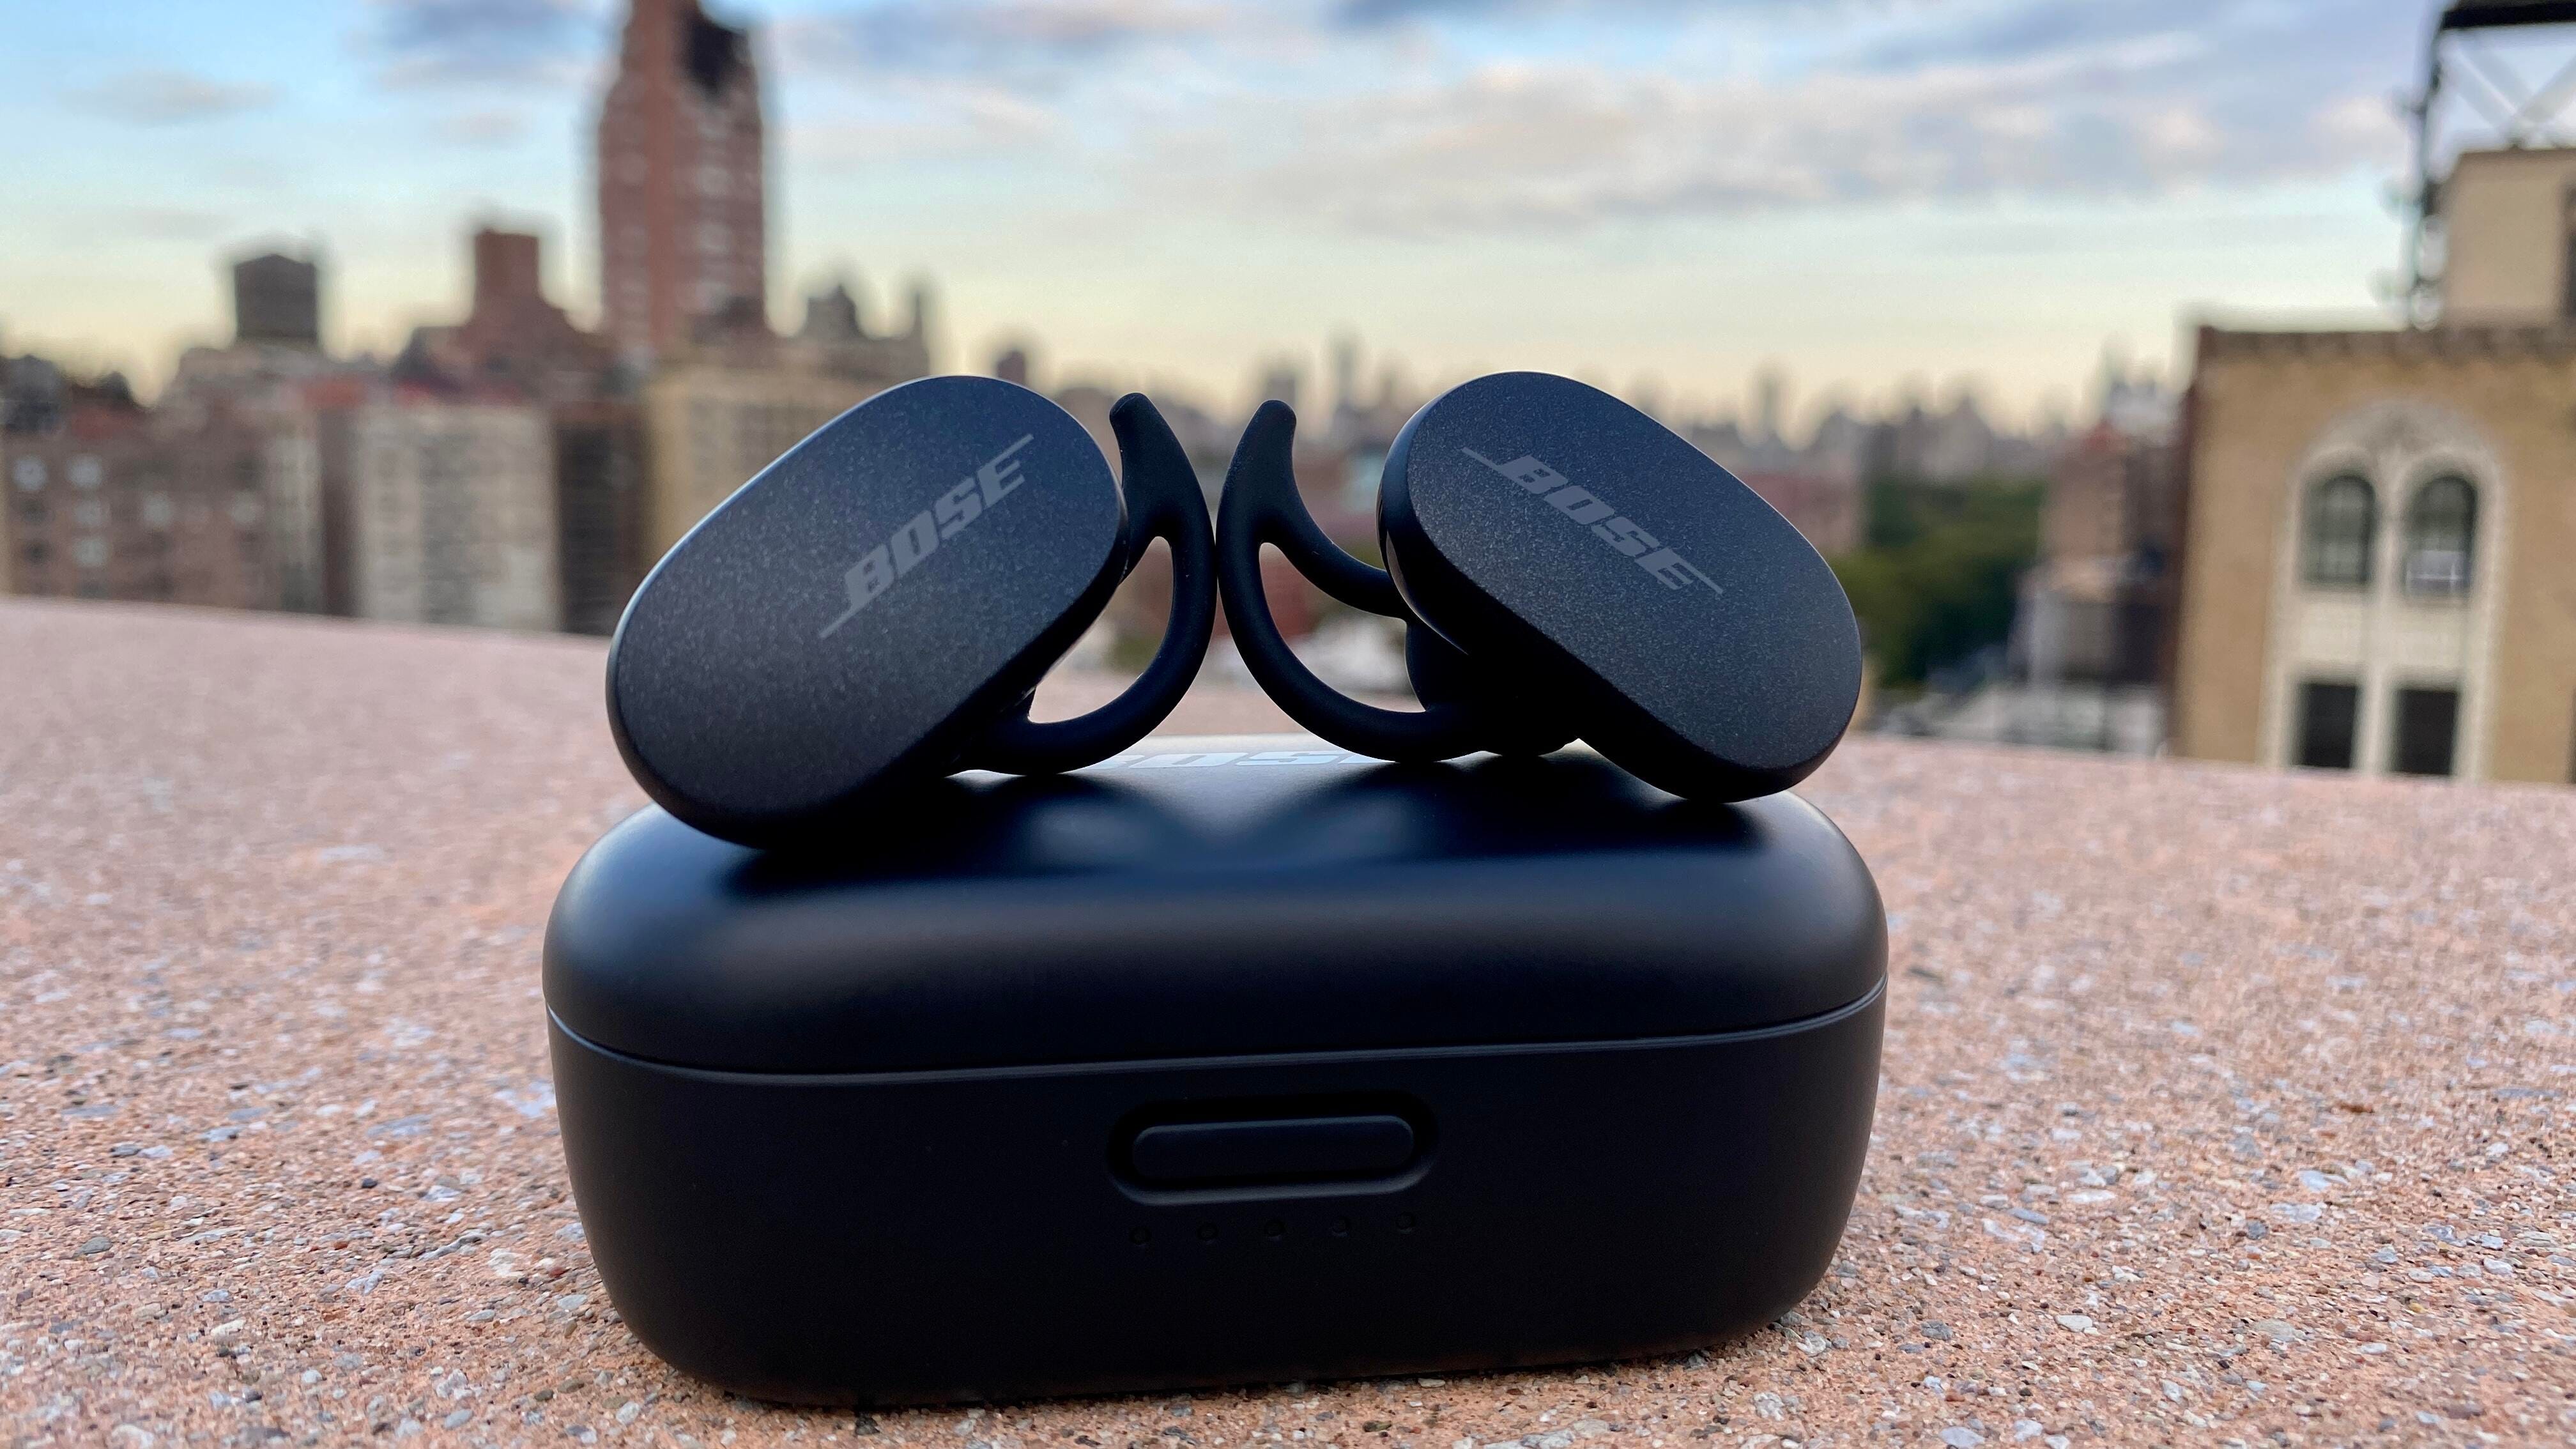 Bose QuietComfort Earbuds review: They beat AirPods Pro on sound and noise canceling but not design - CNET